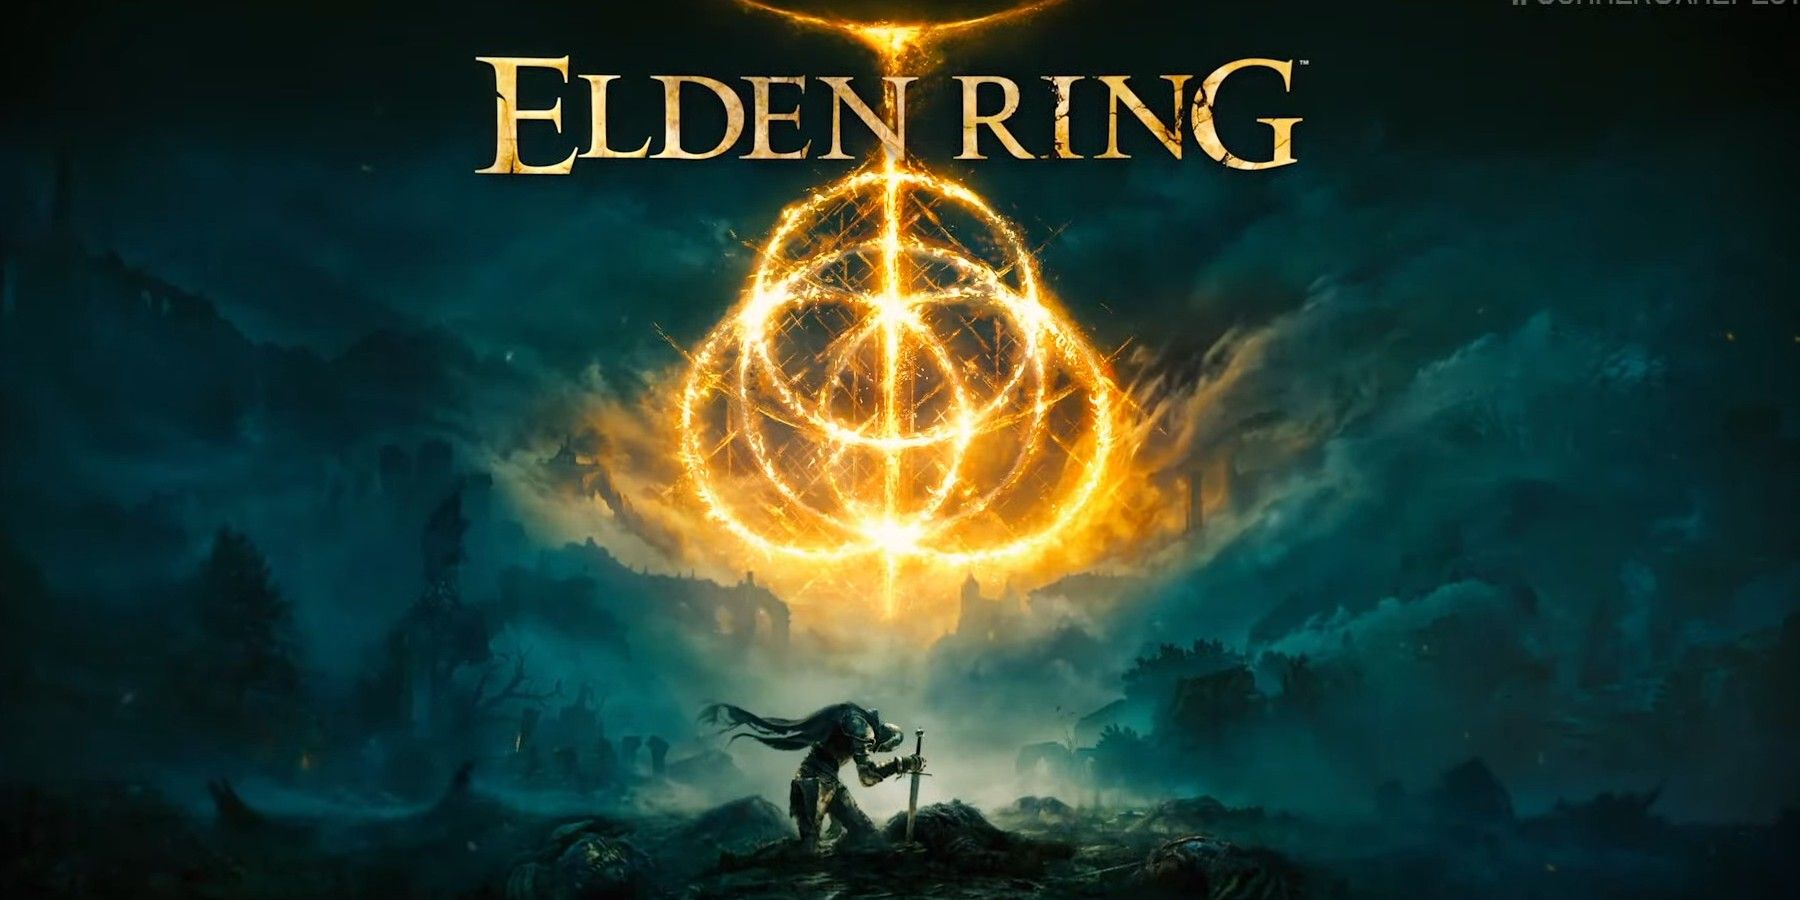 Elden Ring promo art with the Tarnished kneeling under the ring